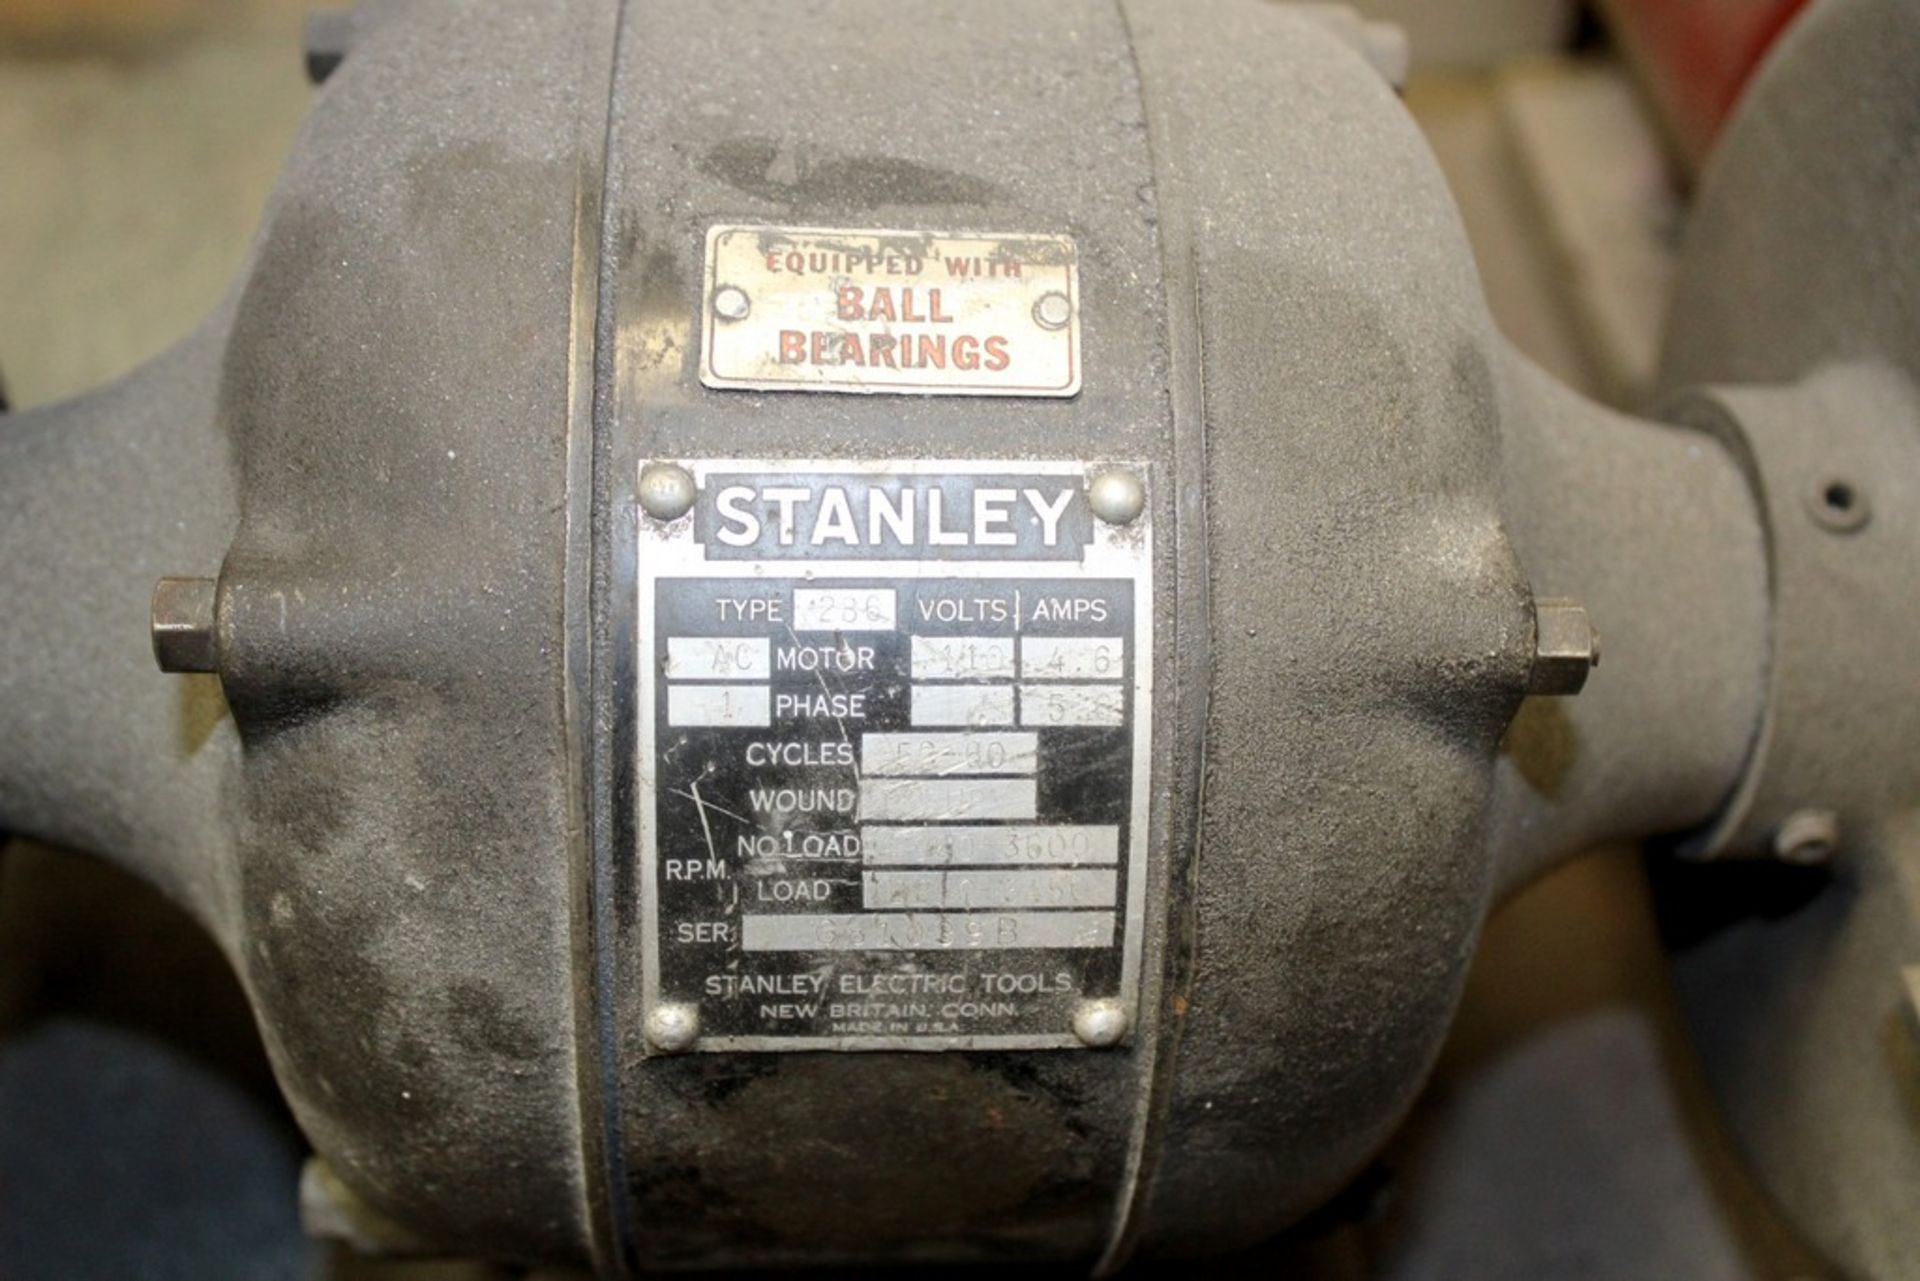 Stanley Type 286 Double End Bench Grinder - 1/3 Hp - 115V - Mounted on Stand - Image 3 of 3